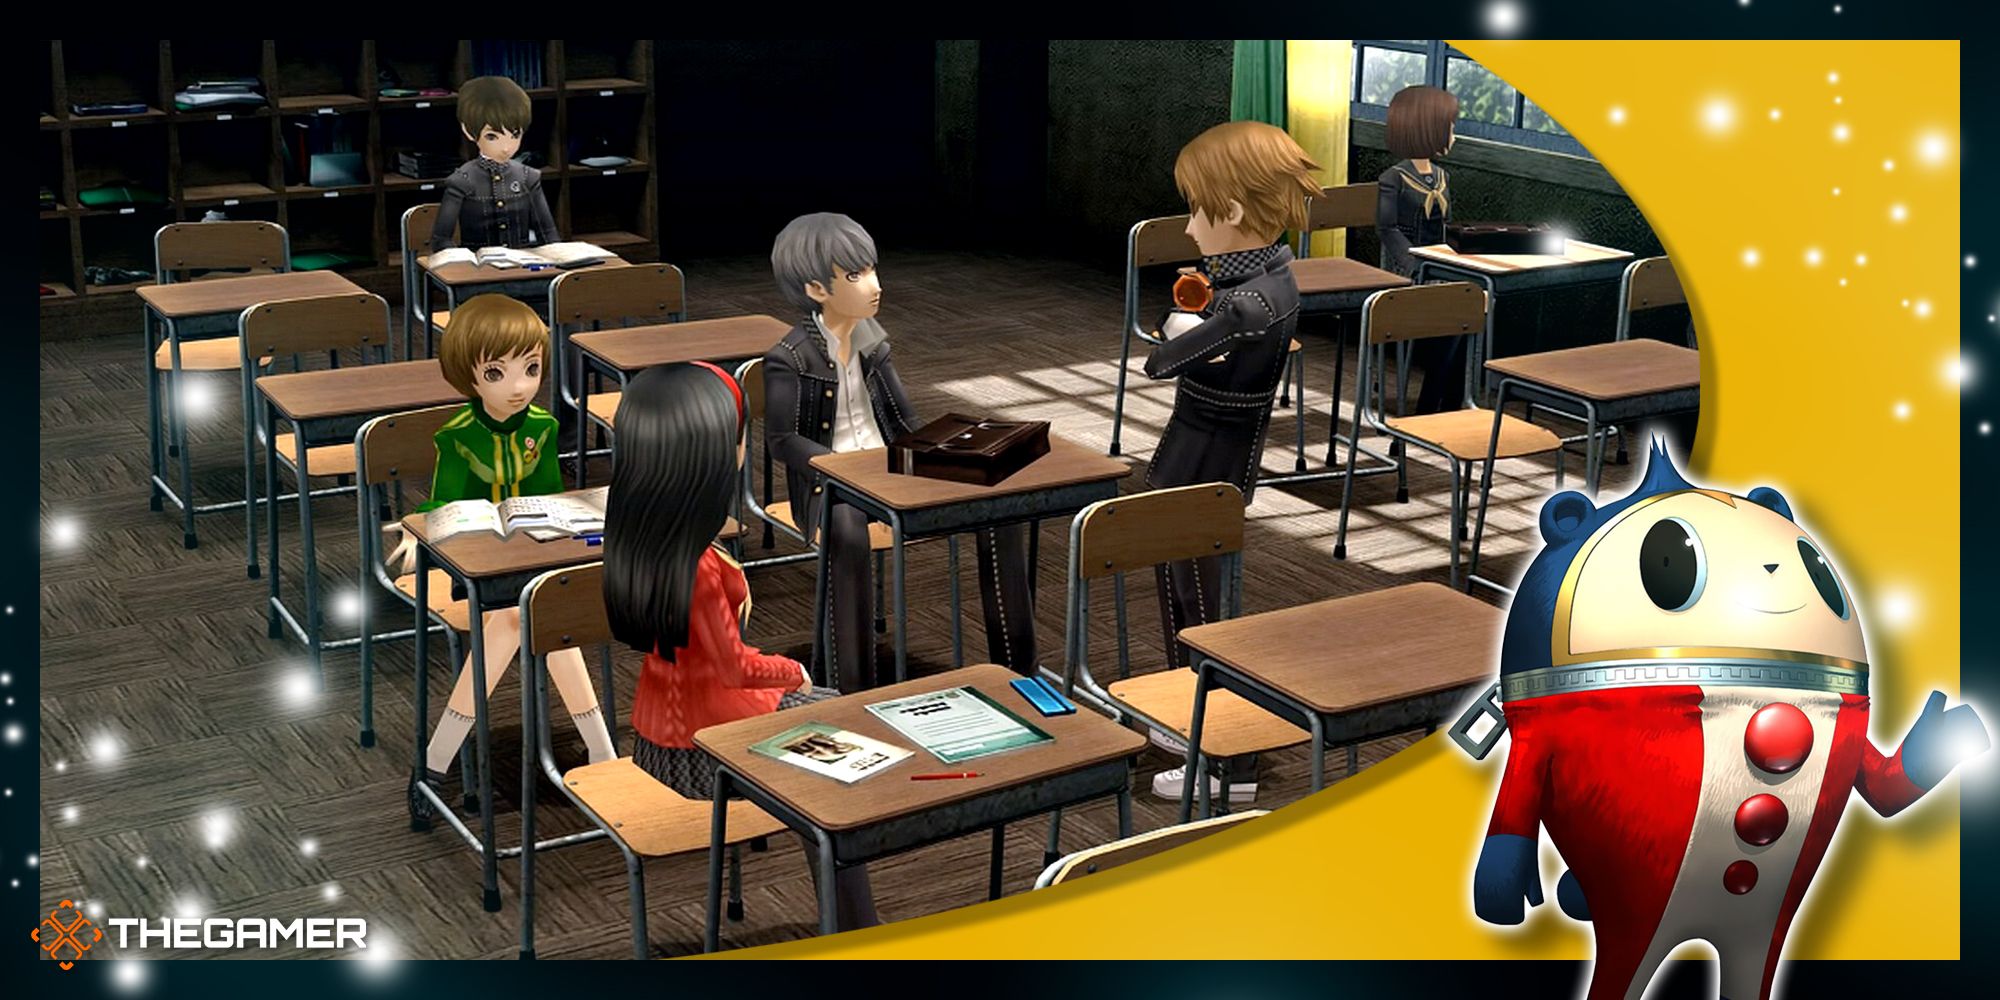 Persona 4 Golden - Yosuke, Yukiko, Chie, and Yu all chatting in class with a Teddie overlay in the corner.-1